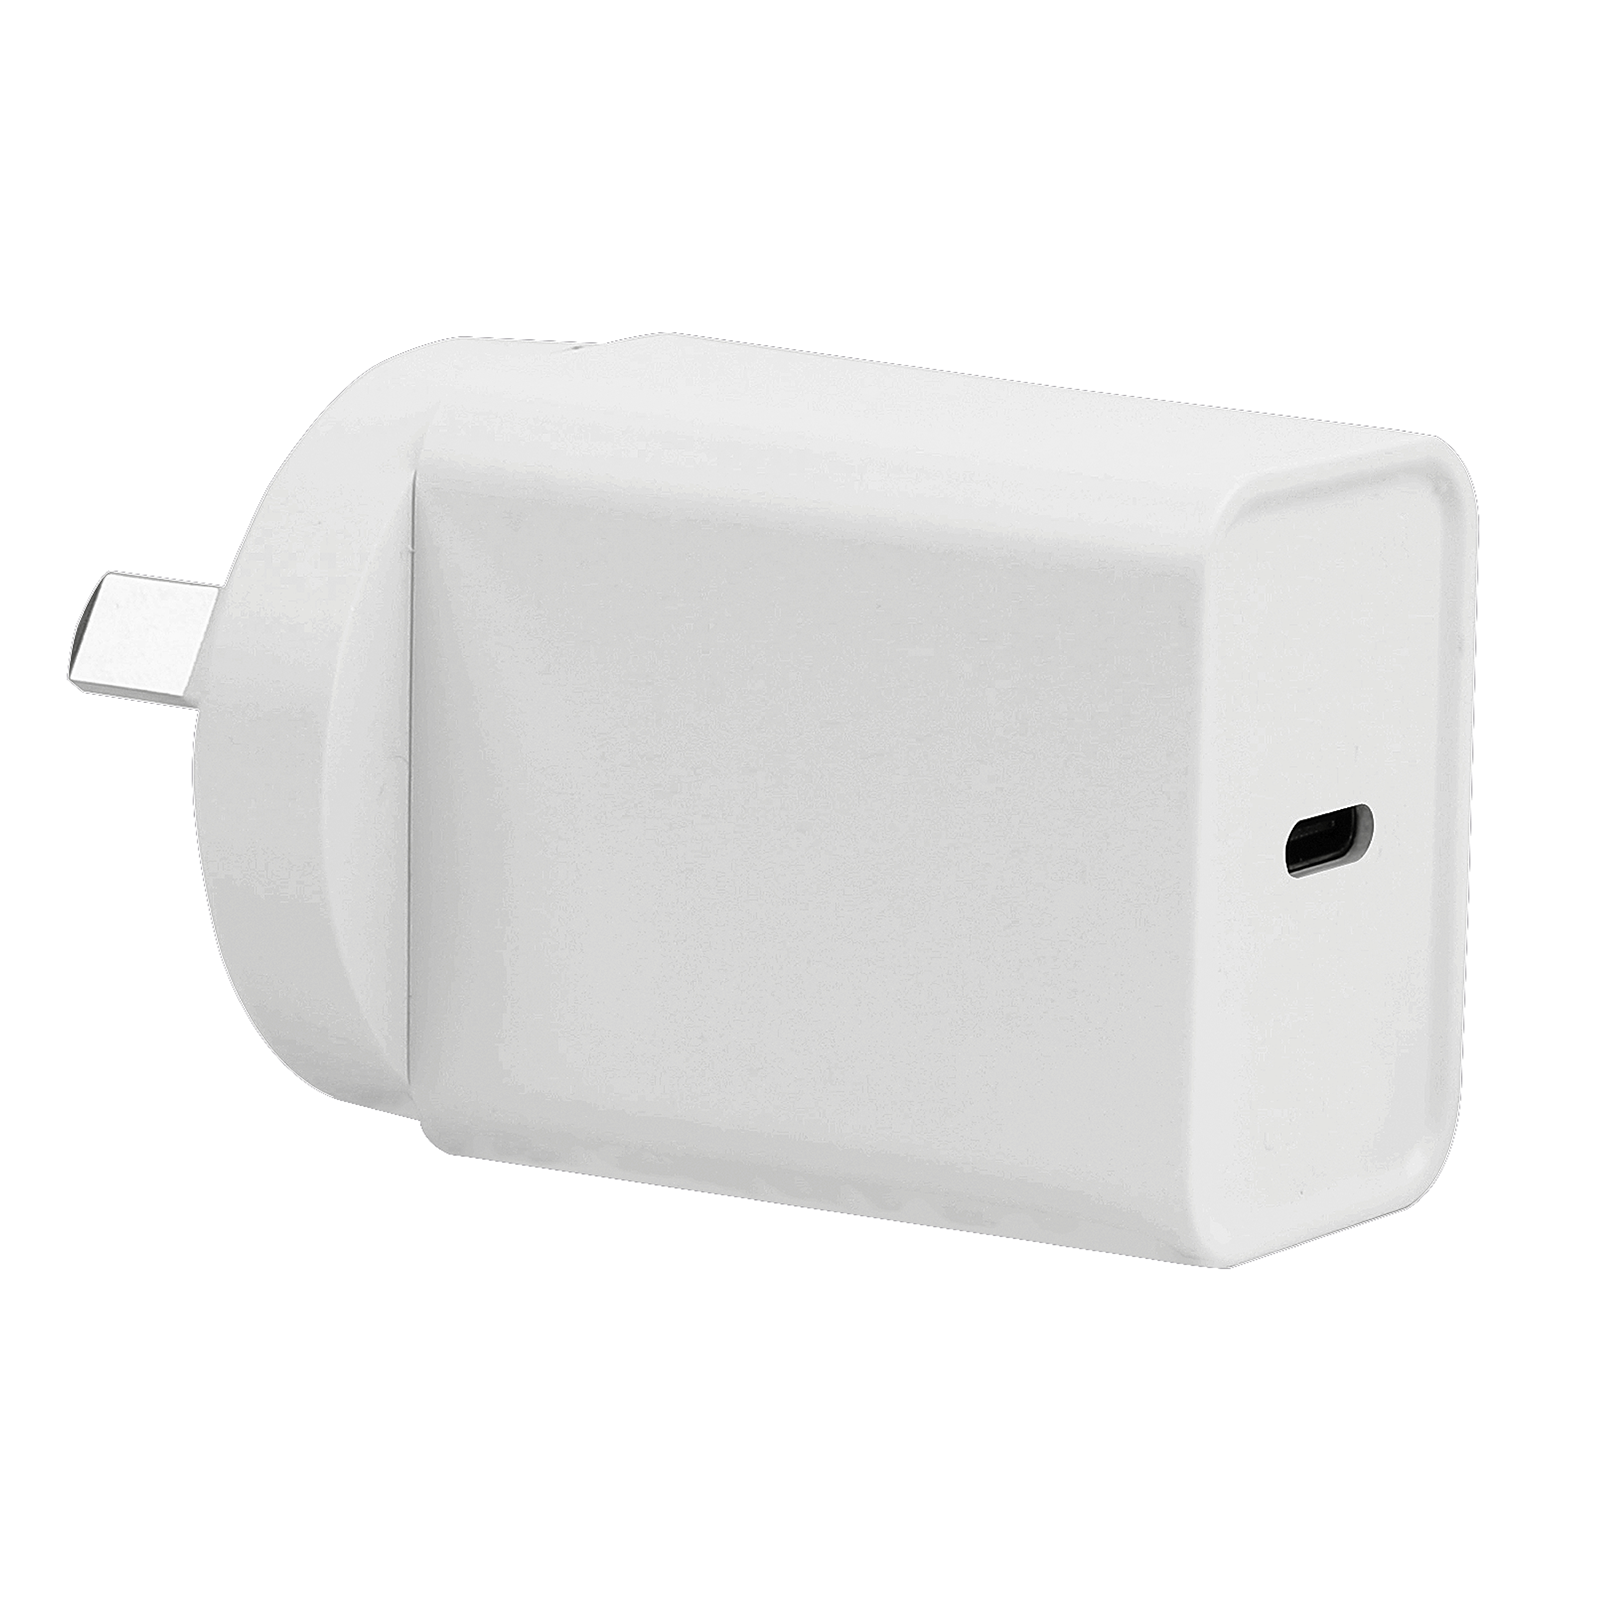 1x USB-A And 1 x USB-C With PD Or QC Car Charger